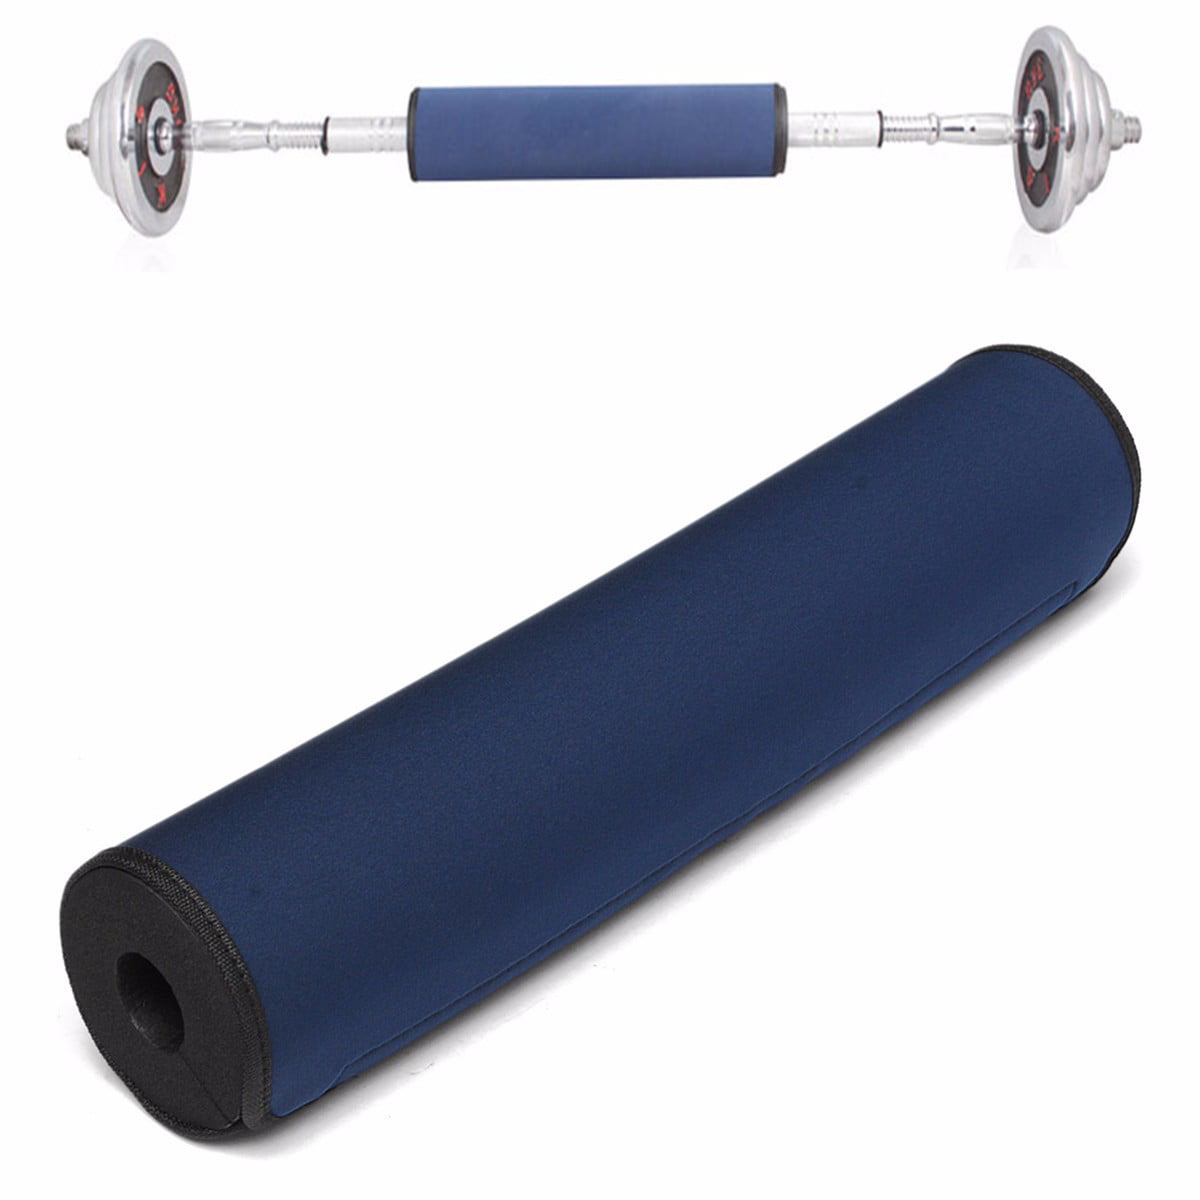 1PC Foam Barbell Bar Rest Pad for Squat Weight Lifting Back Shoulder Olympic Bar 